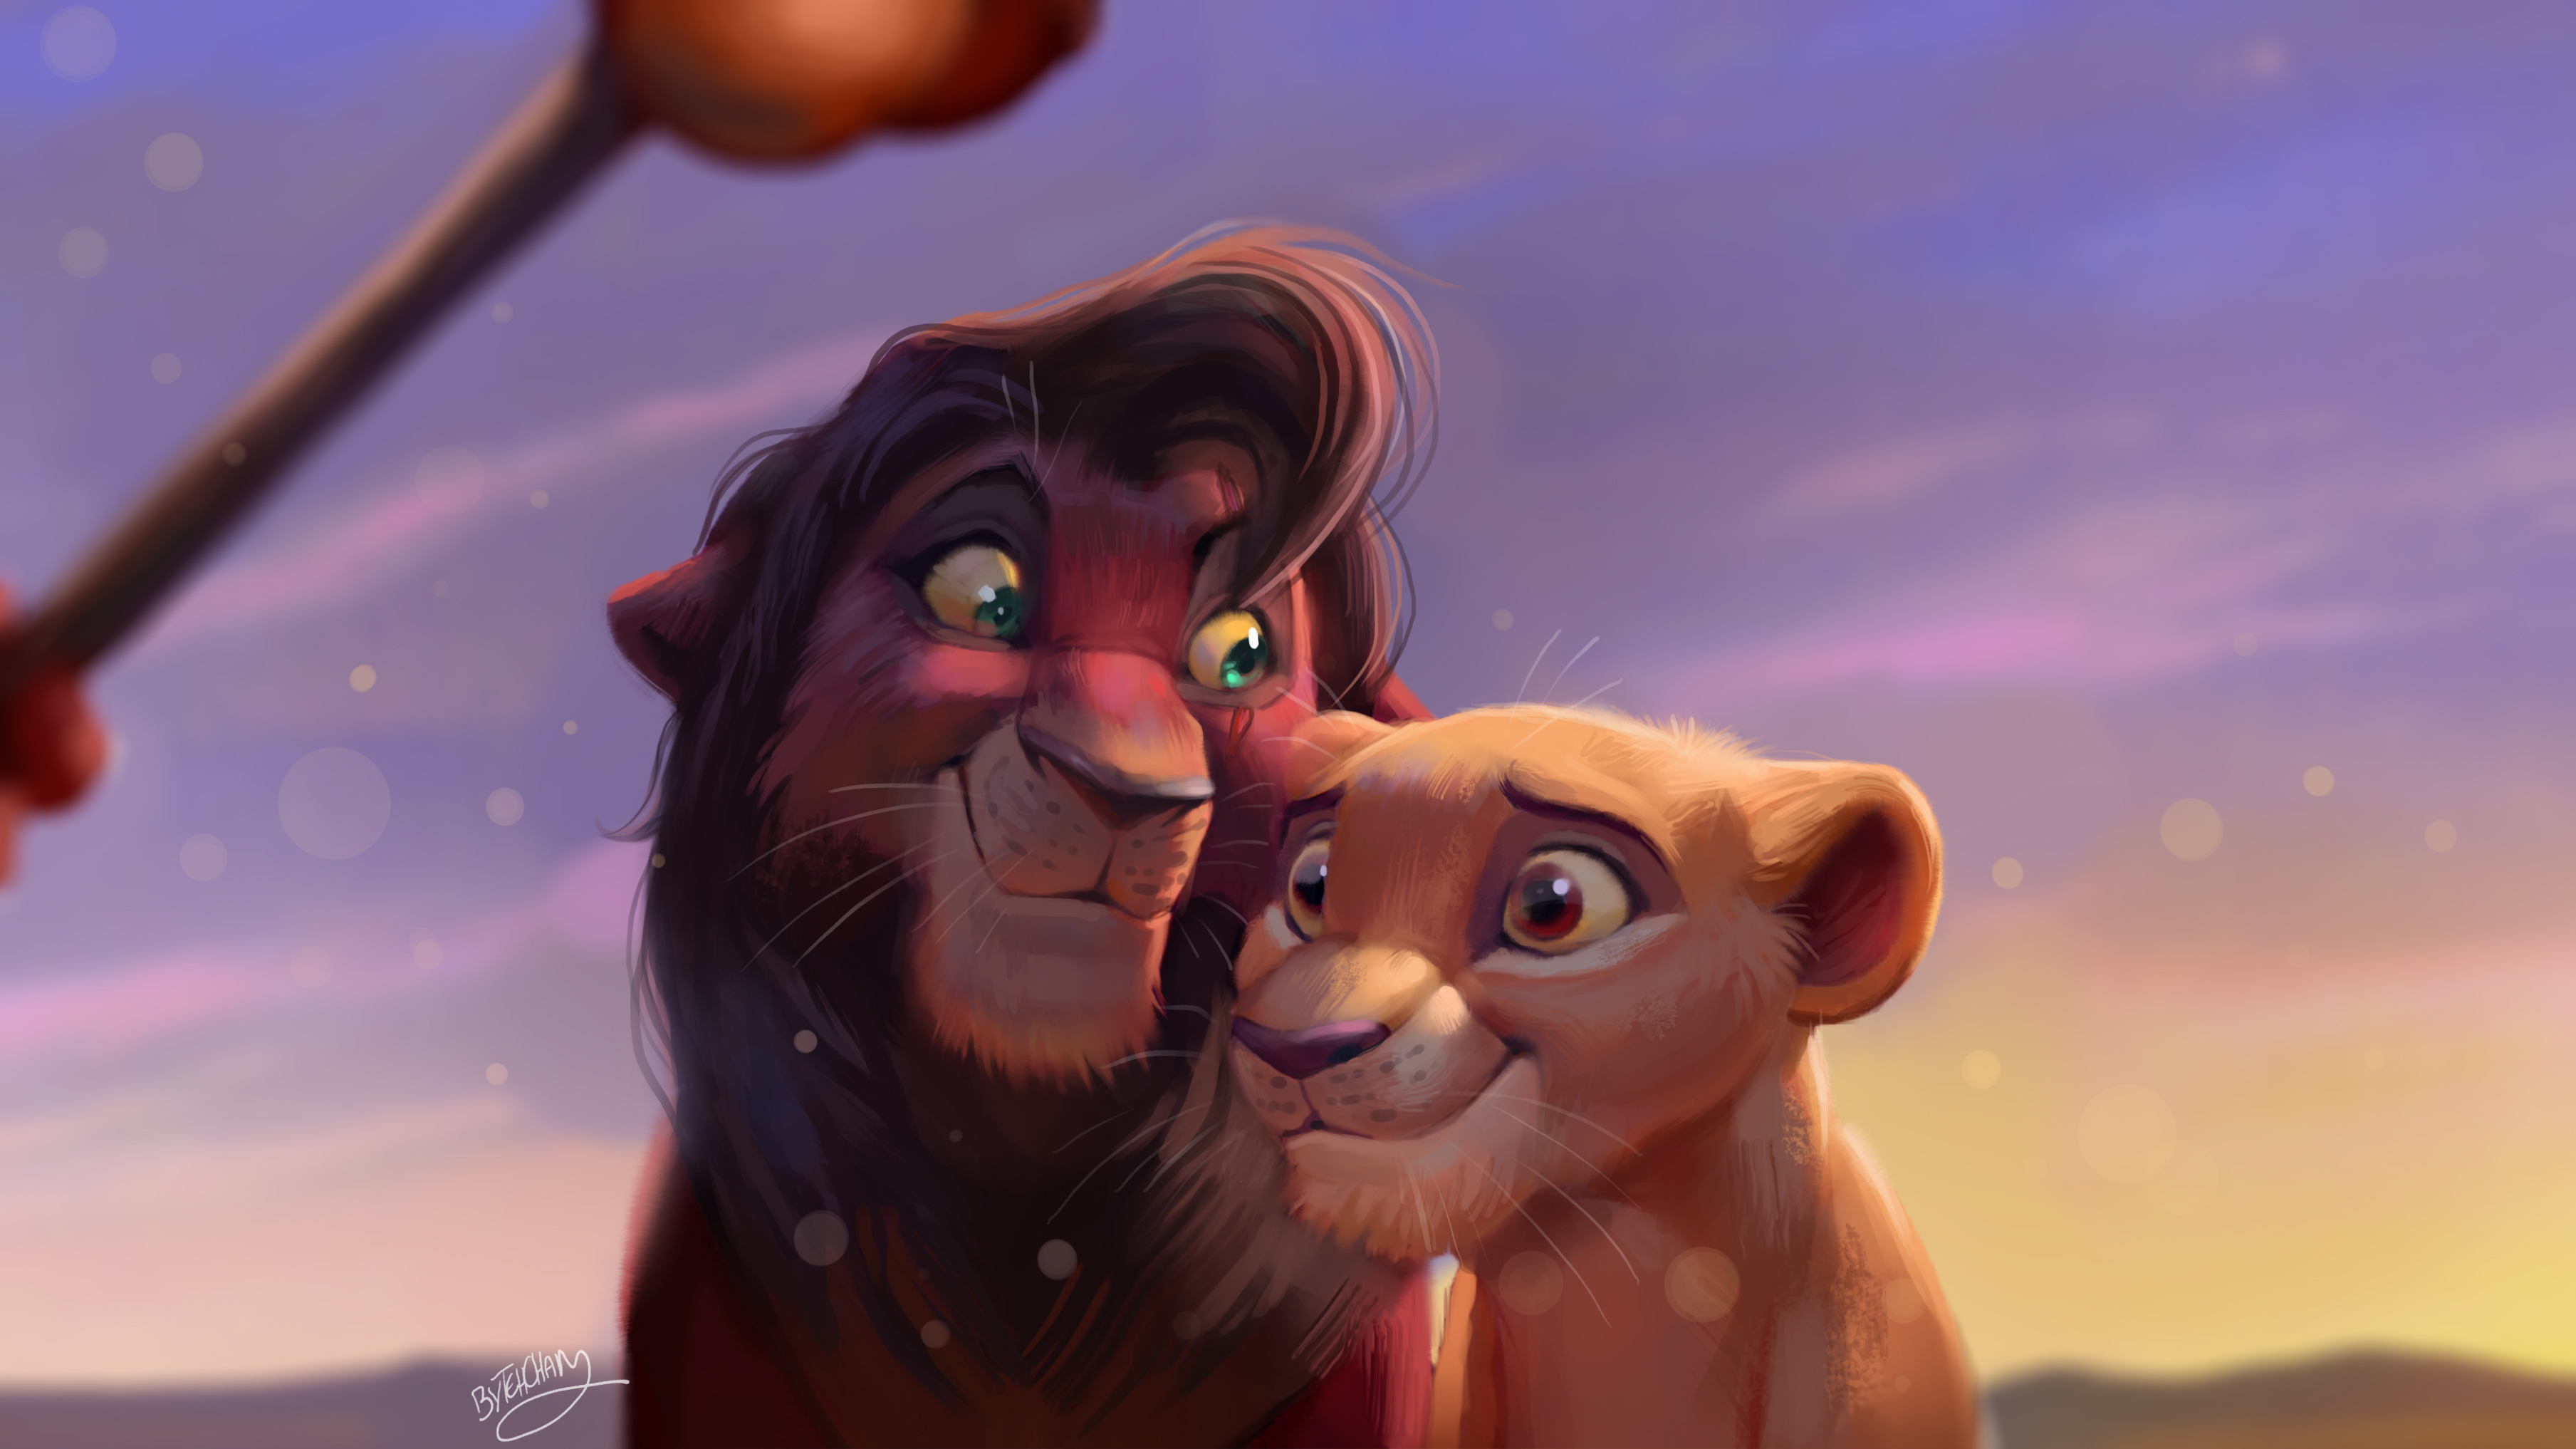 The Lion King 2: Simba's Pride HD Wallpaper | Background ...